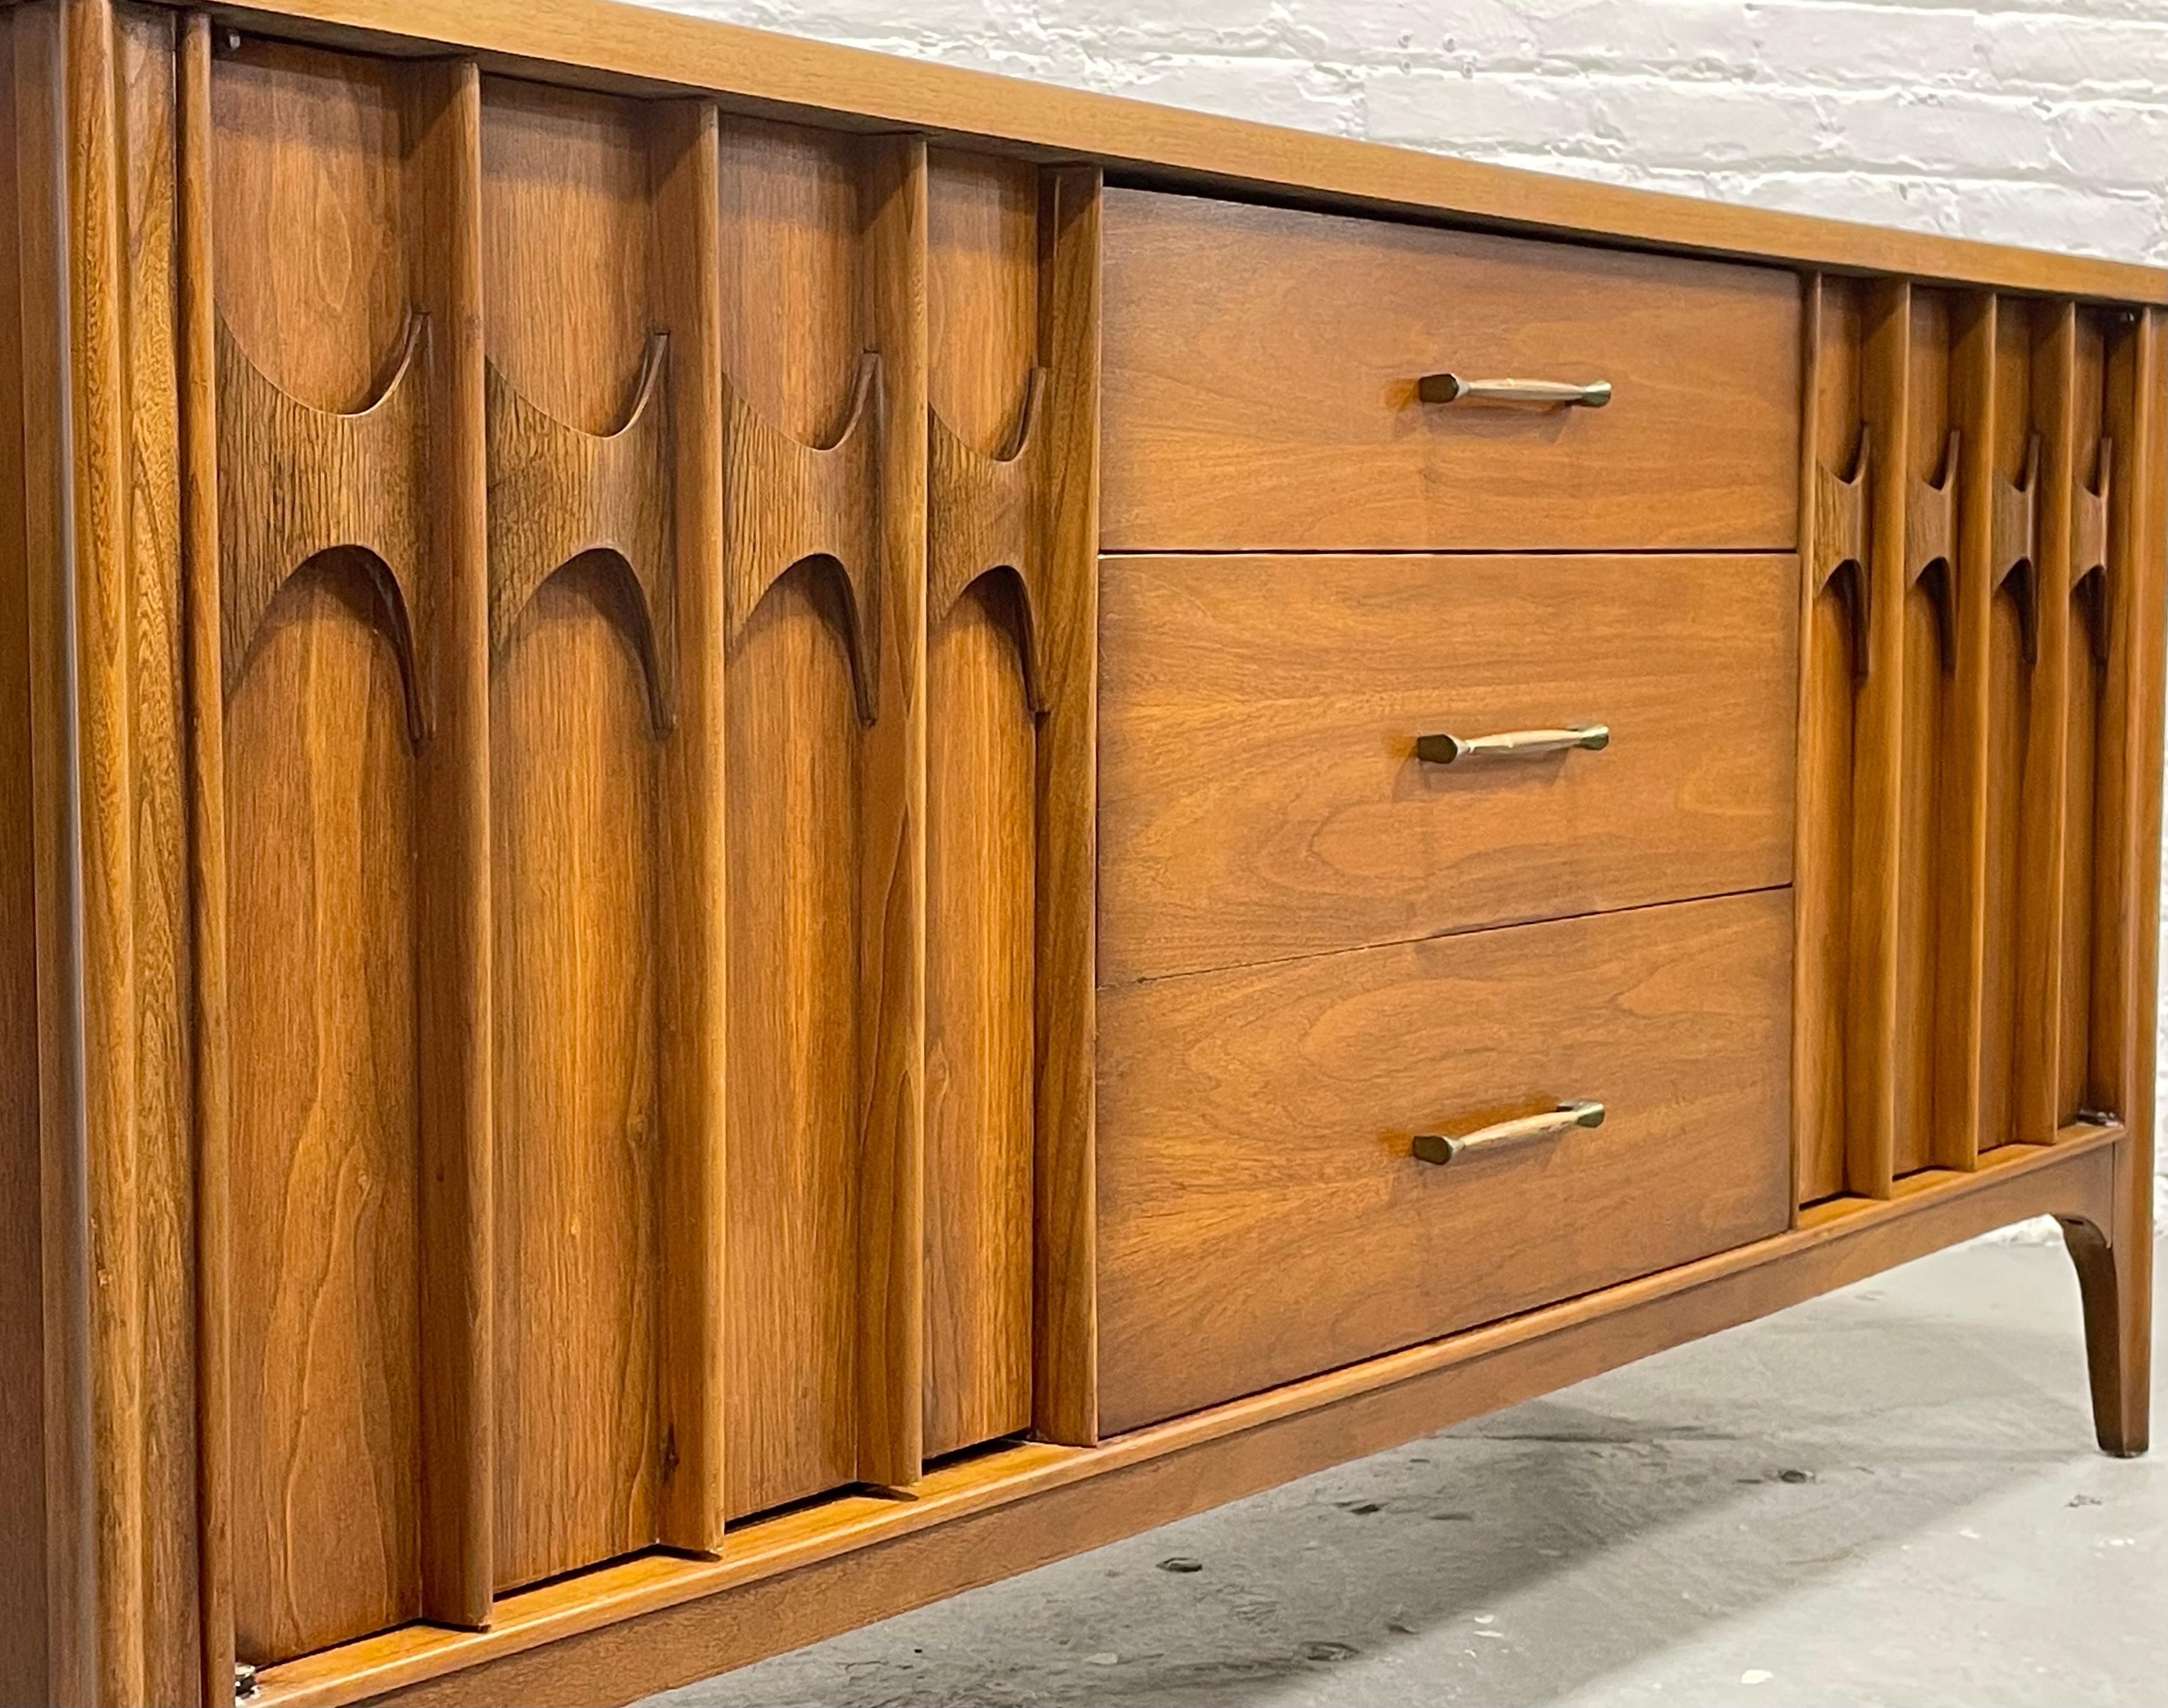 SCULPTED Mid Century MODERN CREDENZA / Long Dresser by Kent Coffey Perspecta, c. 1